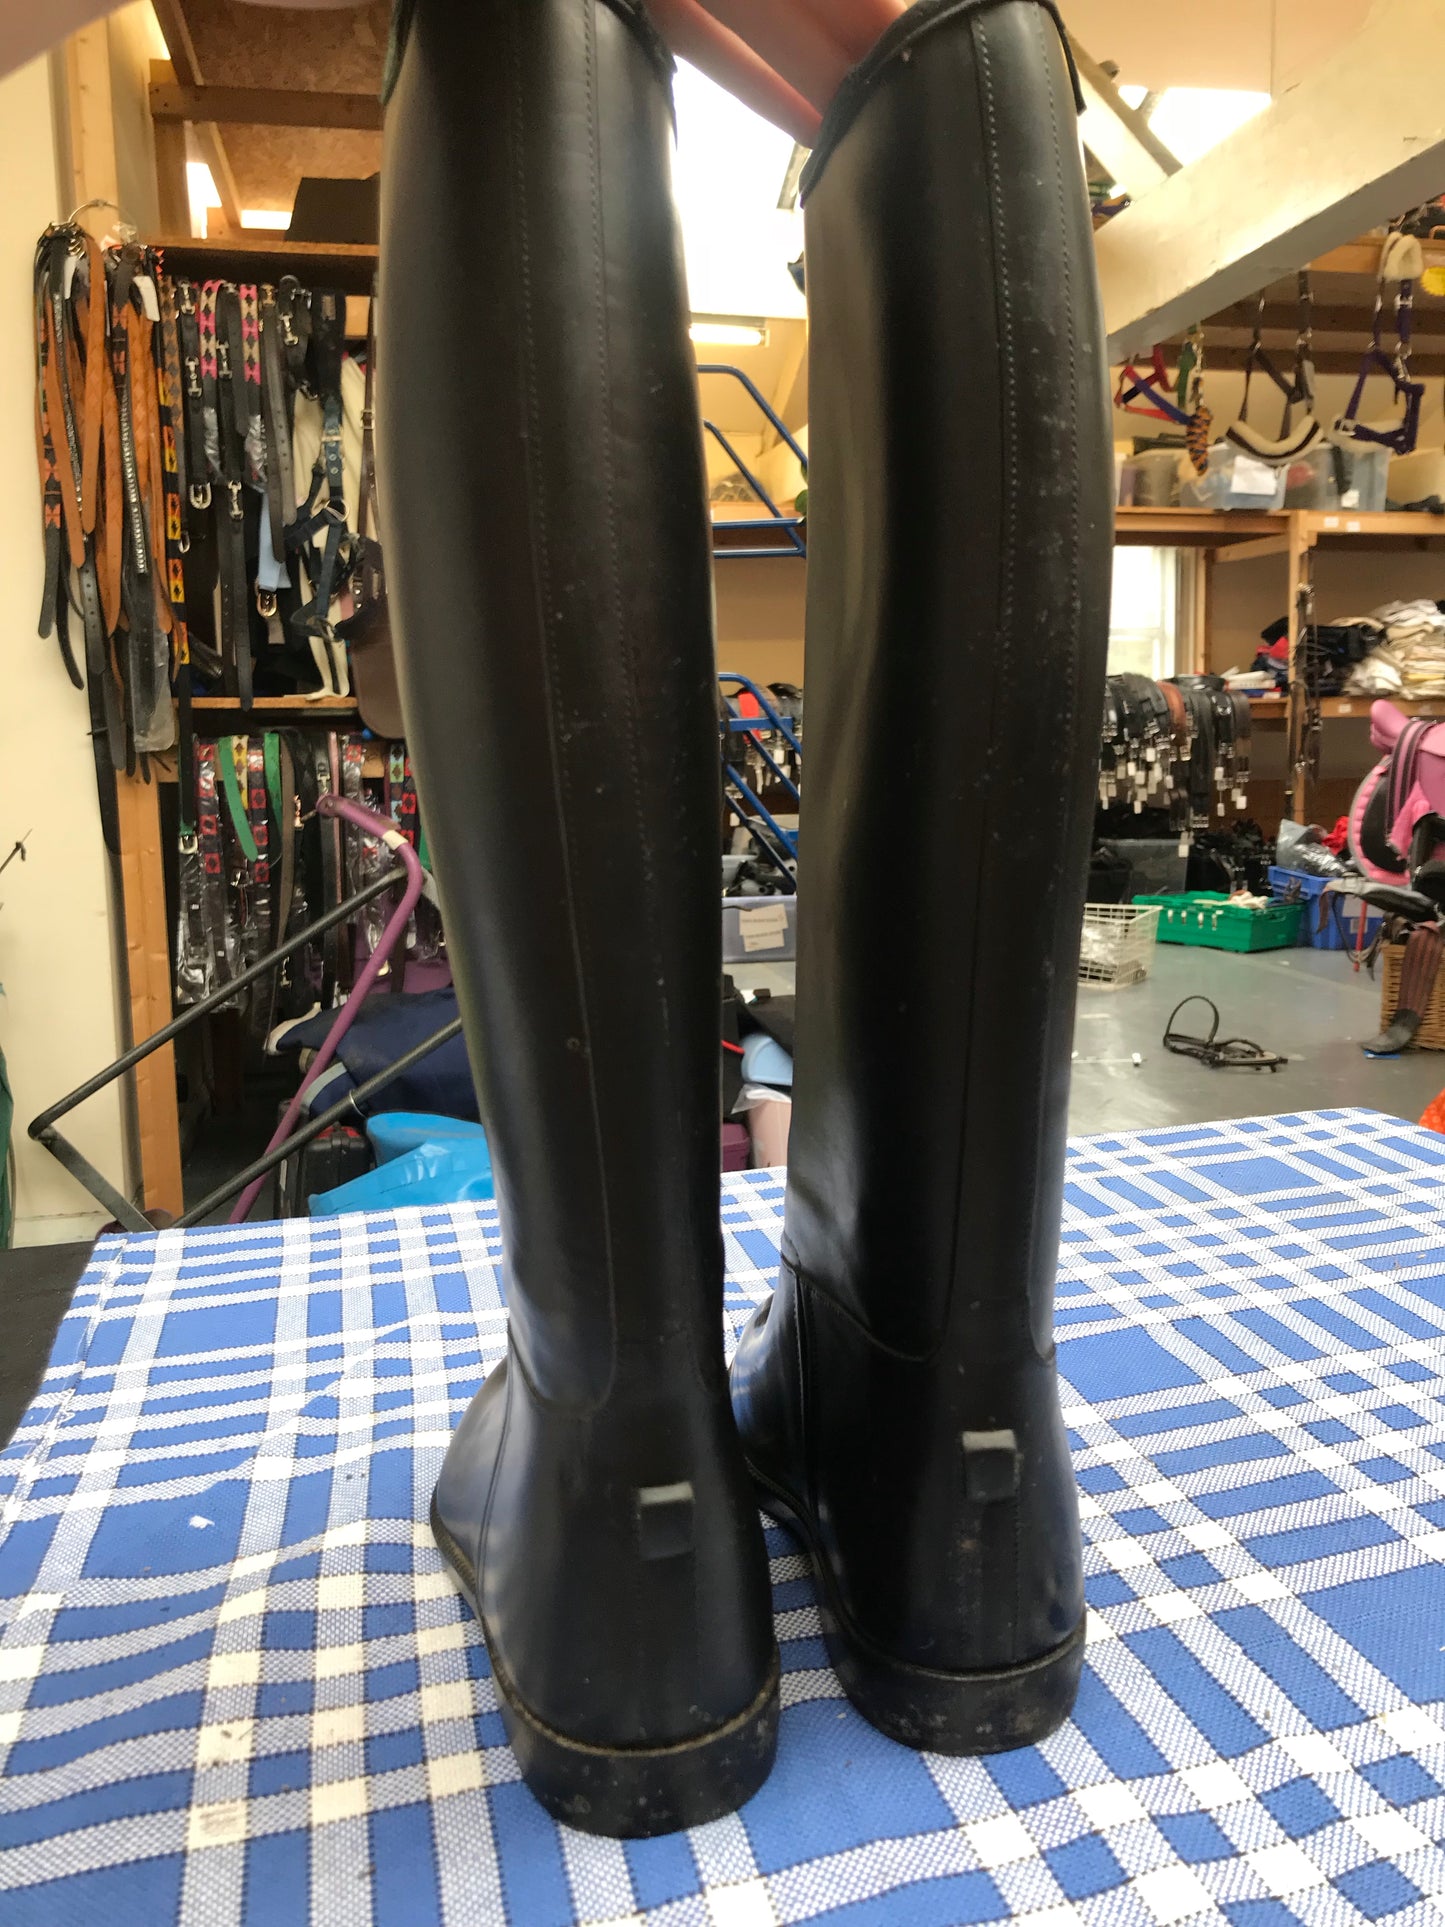 Dublin black rubber long riding boots size 4 13” calf FREE POSTAGE  ✅